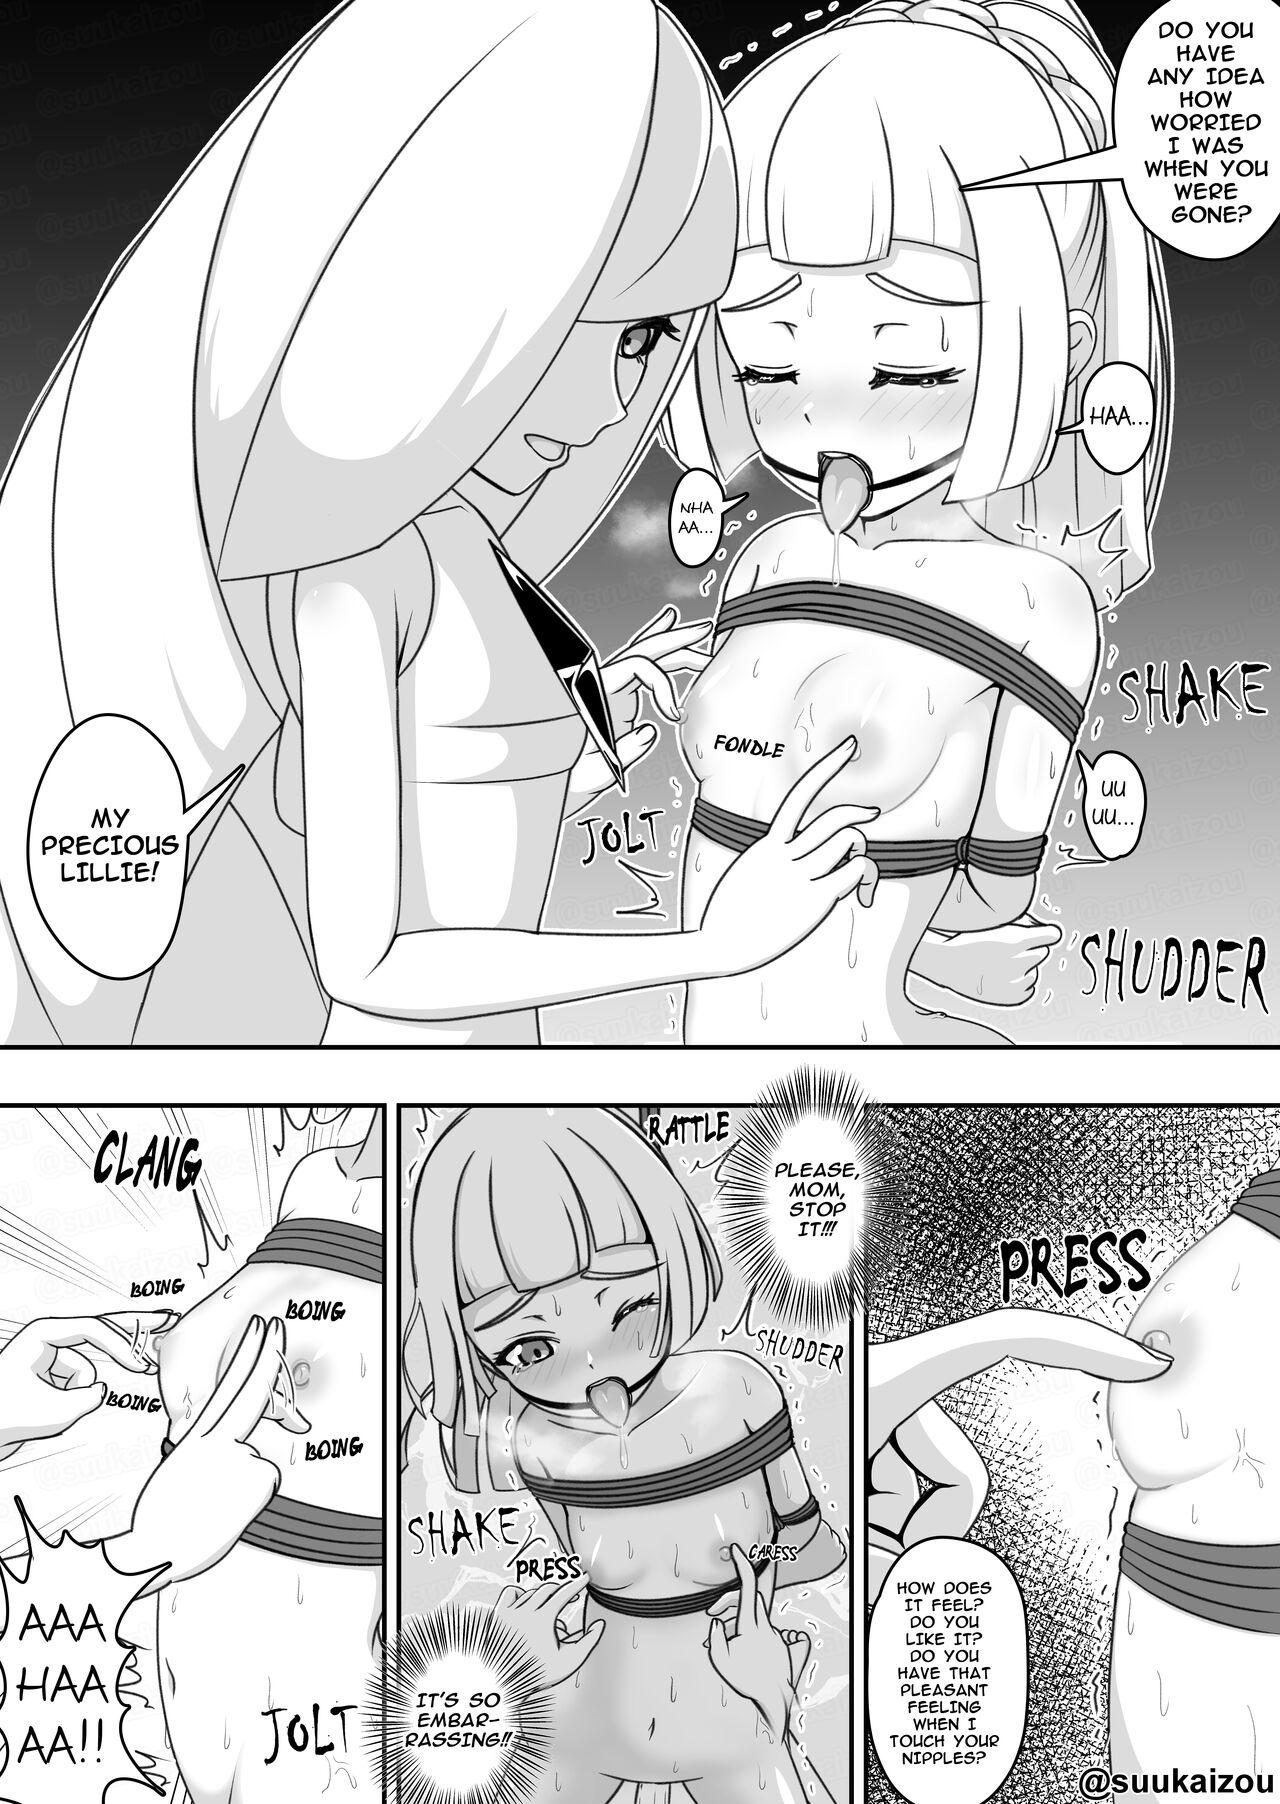 Web Lillie gets spanked by Lusamine. - Pokemon | pocket monsters Chastity - Page 2